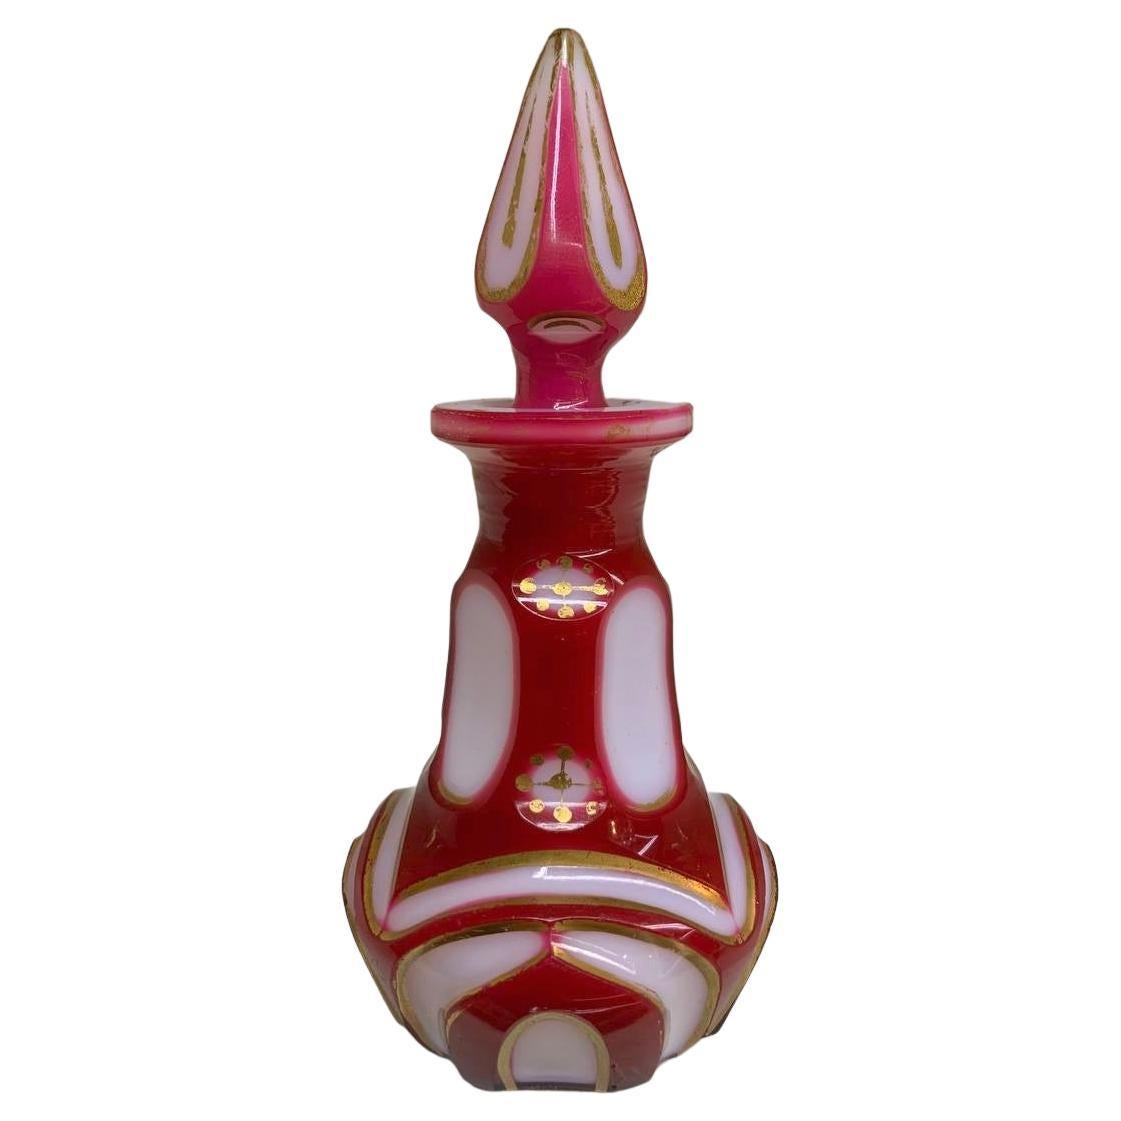 Antique Bohemian Opaline glass perfume bottle

White Opaline Alabaster Glass with Red Overlay

Beautifully Cut and Decorated with Gilding Highlights

Bohemia, 19th Century.